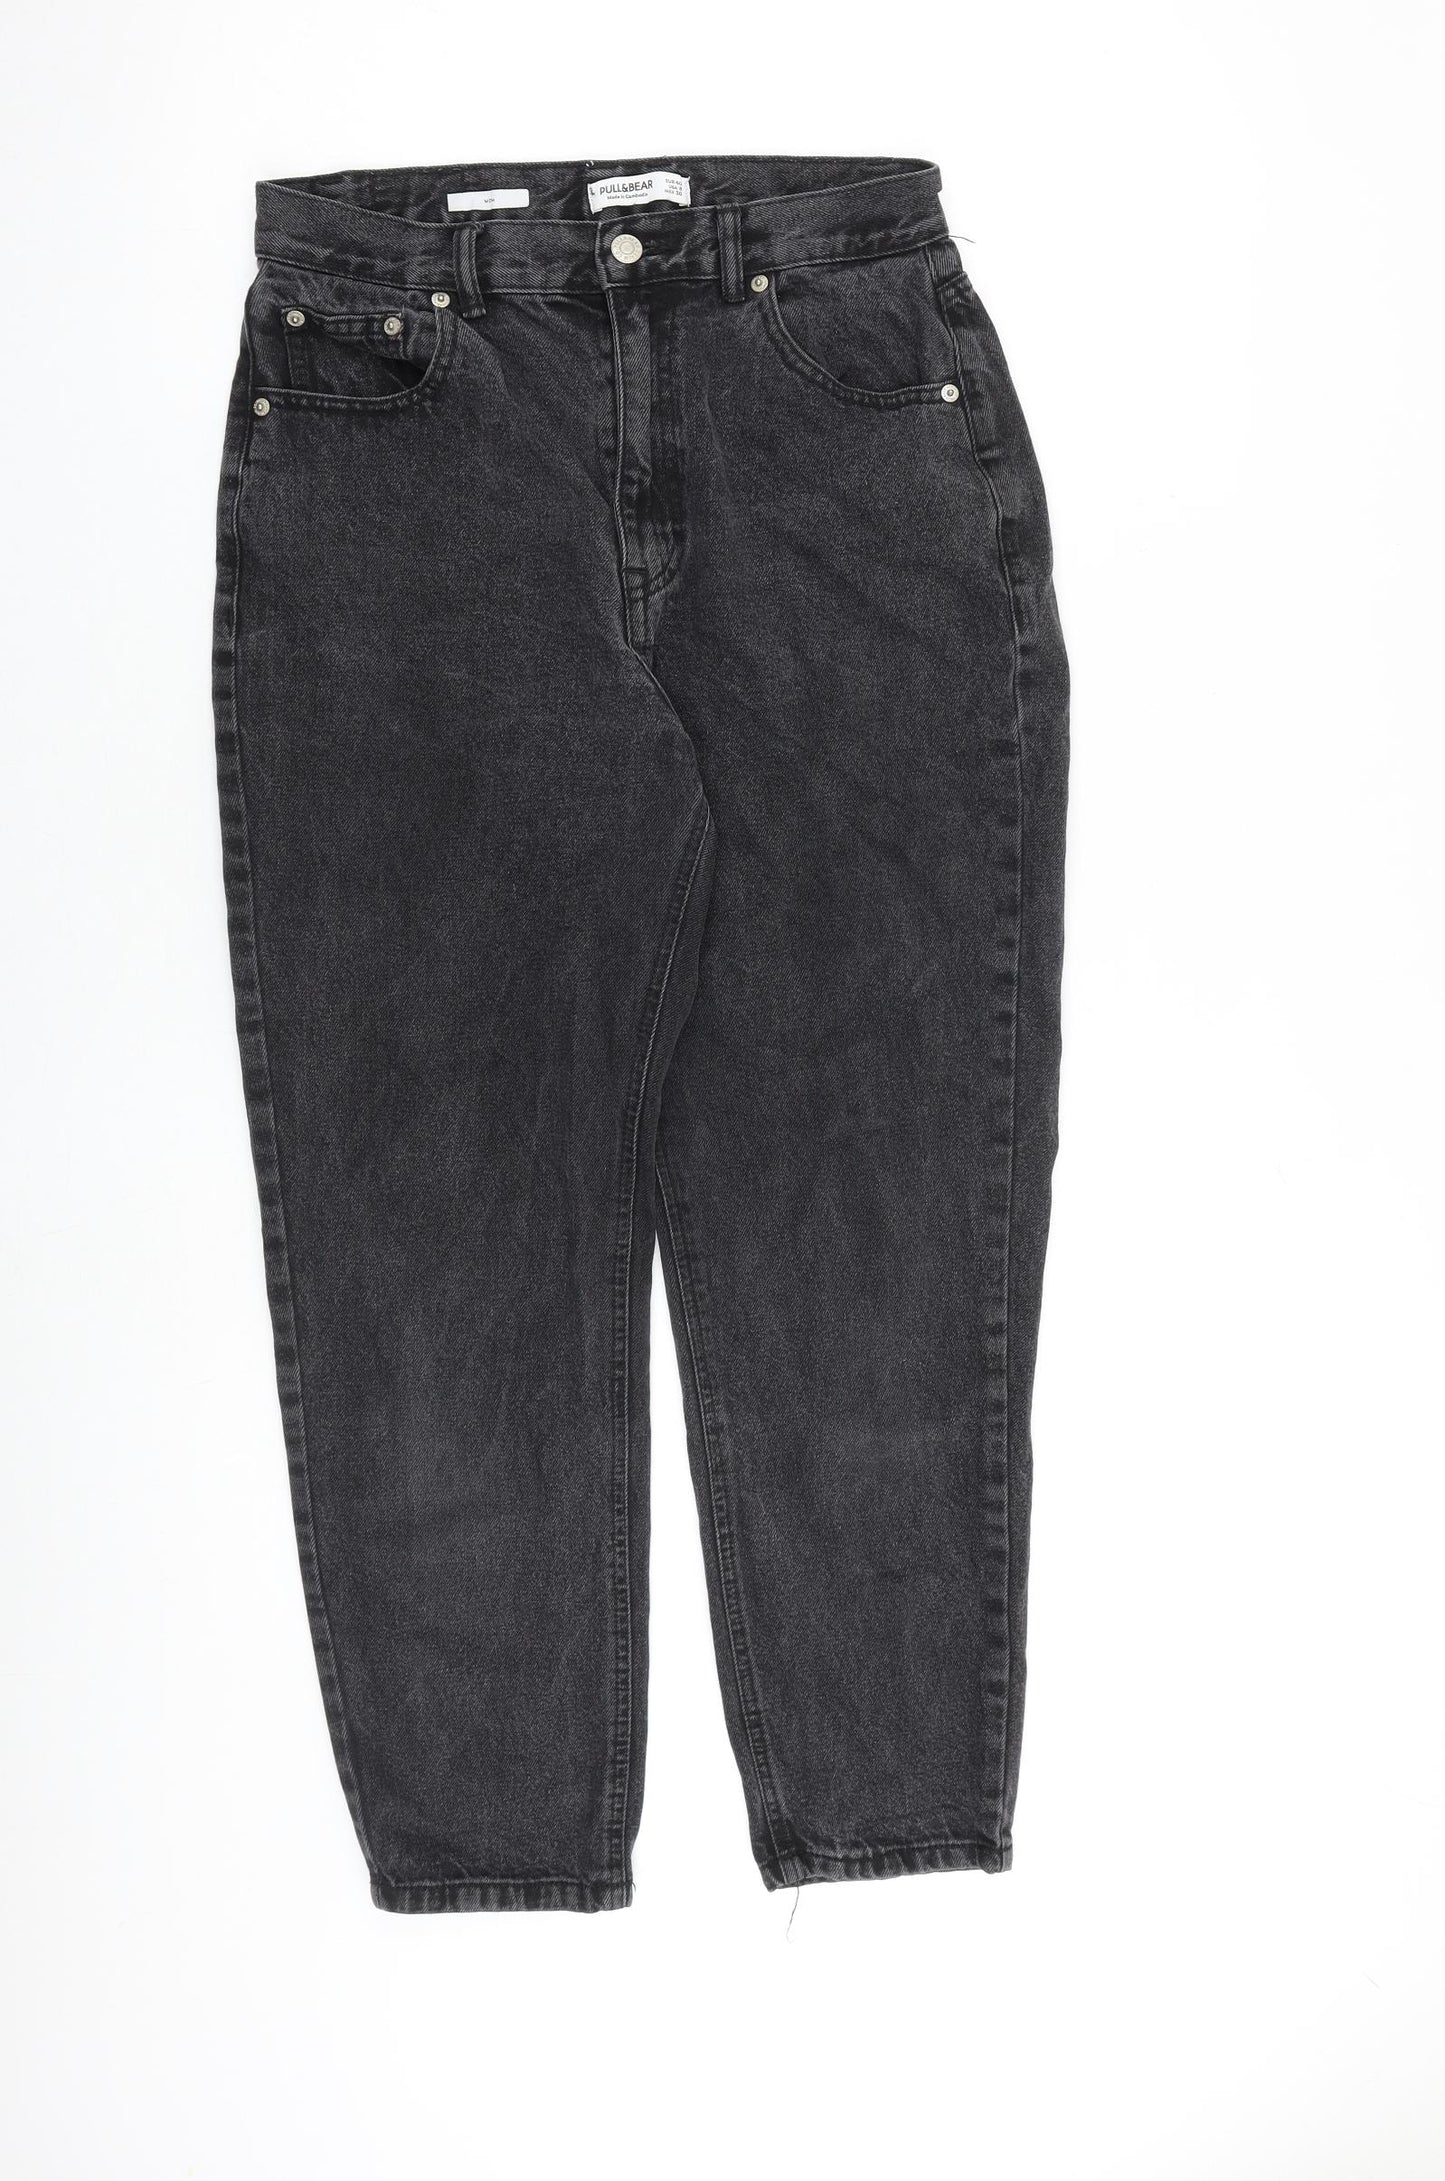 Pull&Bear Womens Black Cotton Tapered Jeans Size 12 L25 in Regular Zip